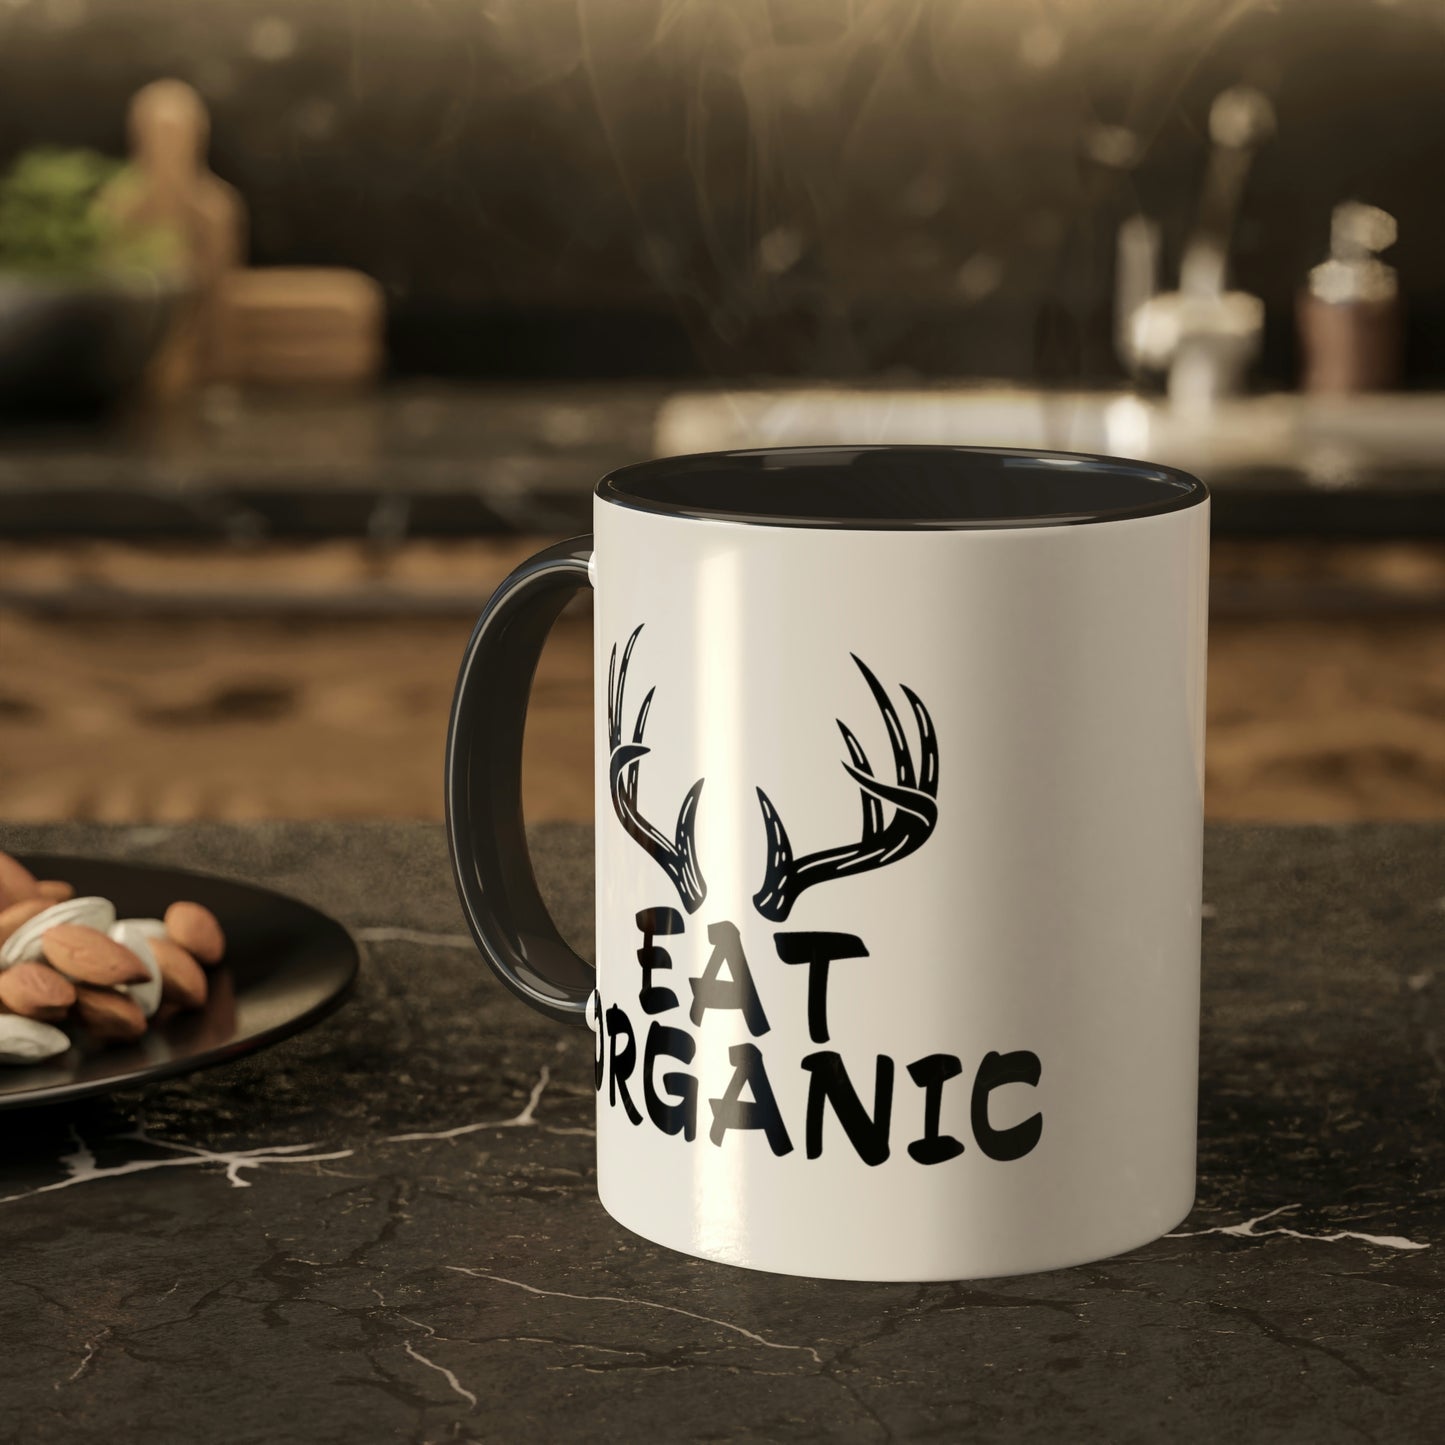 eat-organic-glossy-mug-11-oz-with-deer-horns-on-a-wooden-table-hunting